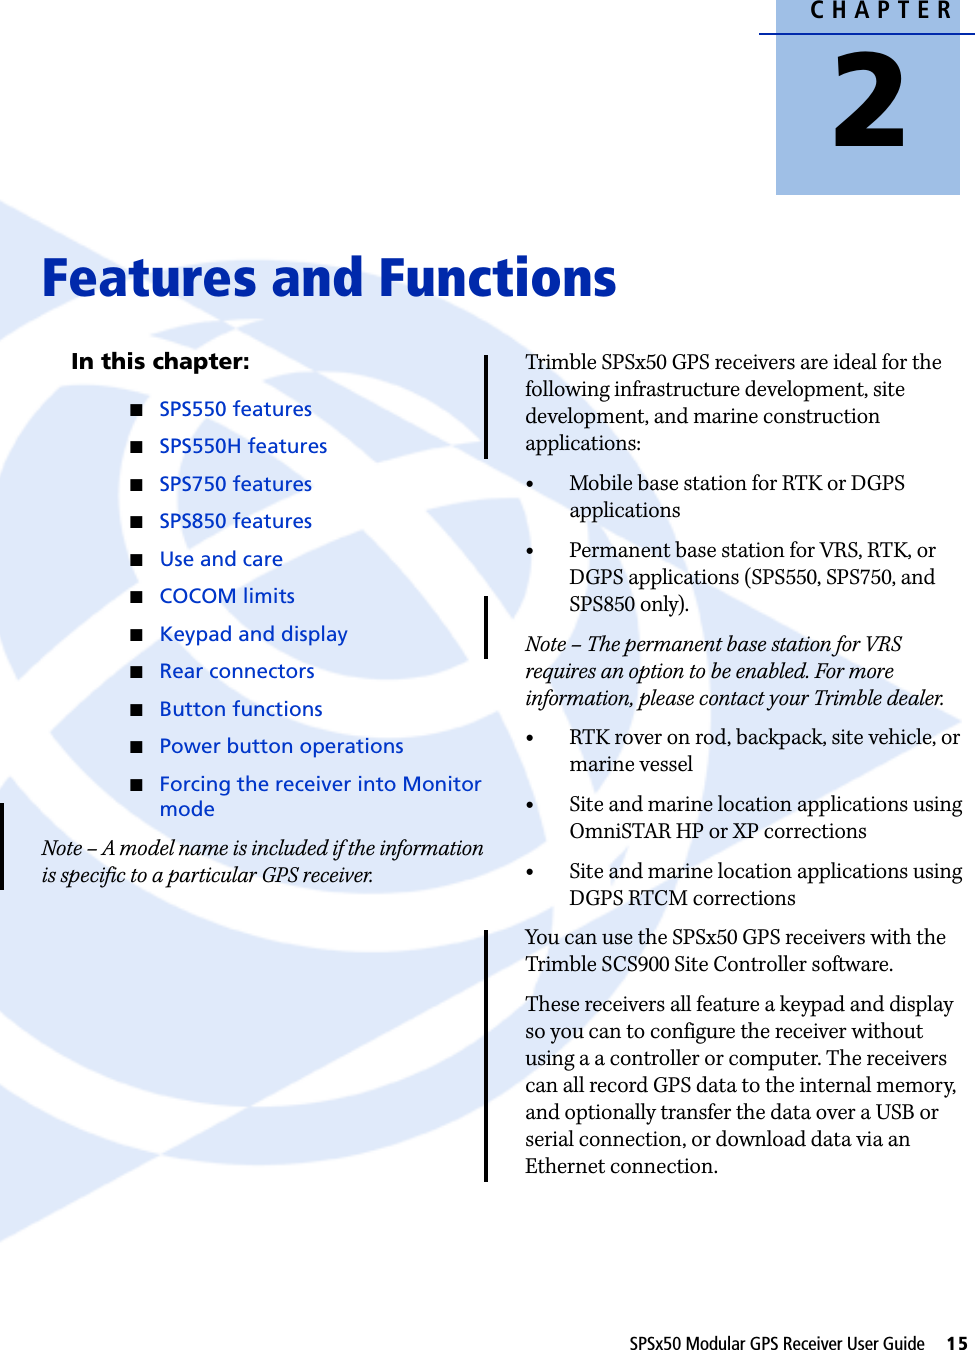 CHAPTER2SPSx50 Modular GPS Receiver User Guide     15Features and Functions 2In this chapter:QSPS550 featuresQSPS550H featuresQSPS750 featuresQSPS850 featuresQUse and careQCOCOM limitsQKeypad and displayQRear connectorsQButton functionsQPower button operationsQForcing the receiver into Monitor modeNote – A model name is included if the information is specific to a particular GPS receiver.Trimble SPSx50 GPS receivers are ideal for the following infrastructure development, site development, and marine construction applications:•Mobile base station for RTK or DGPS applications•Permanent base station for VRS, RTK, or DGPS applications (SPS550, SPS750, and SPS850 only).Note – The permanent base station for VRS requires an option to be enabled. For more information, please contact your Trimble dealer.•RTK rover on rod, backpack, site vehicle, or marine vessel•Site and marine location applications using OmniSTAR HP or XP corrections•Site and marine location applications using DGPS RTCM correctionsYou can use the SPSx50 GPS receivers with the Trimble SCS900 Site Controller software.These receivers all feature a keypad and display so you can to configure the receiver without using a a controller or computer. The receivers can all record GPS data to the internal memory, and optionally transfer the data over a USB or serial connection, or download data via an Ethernet connection.